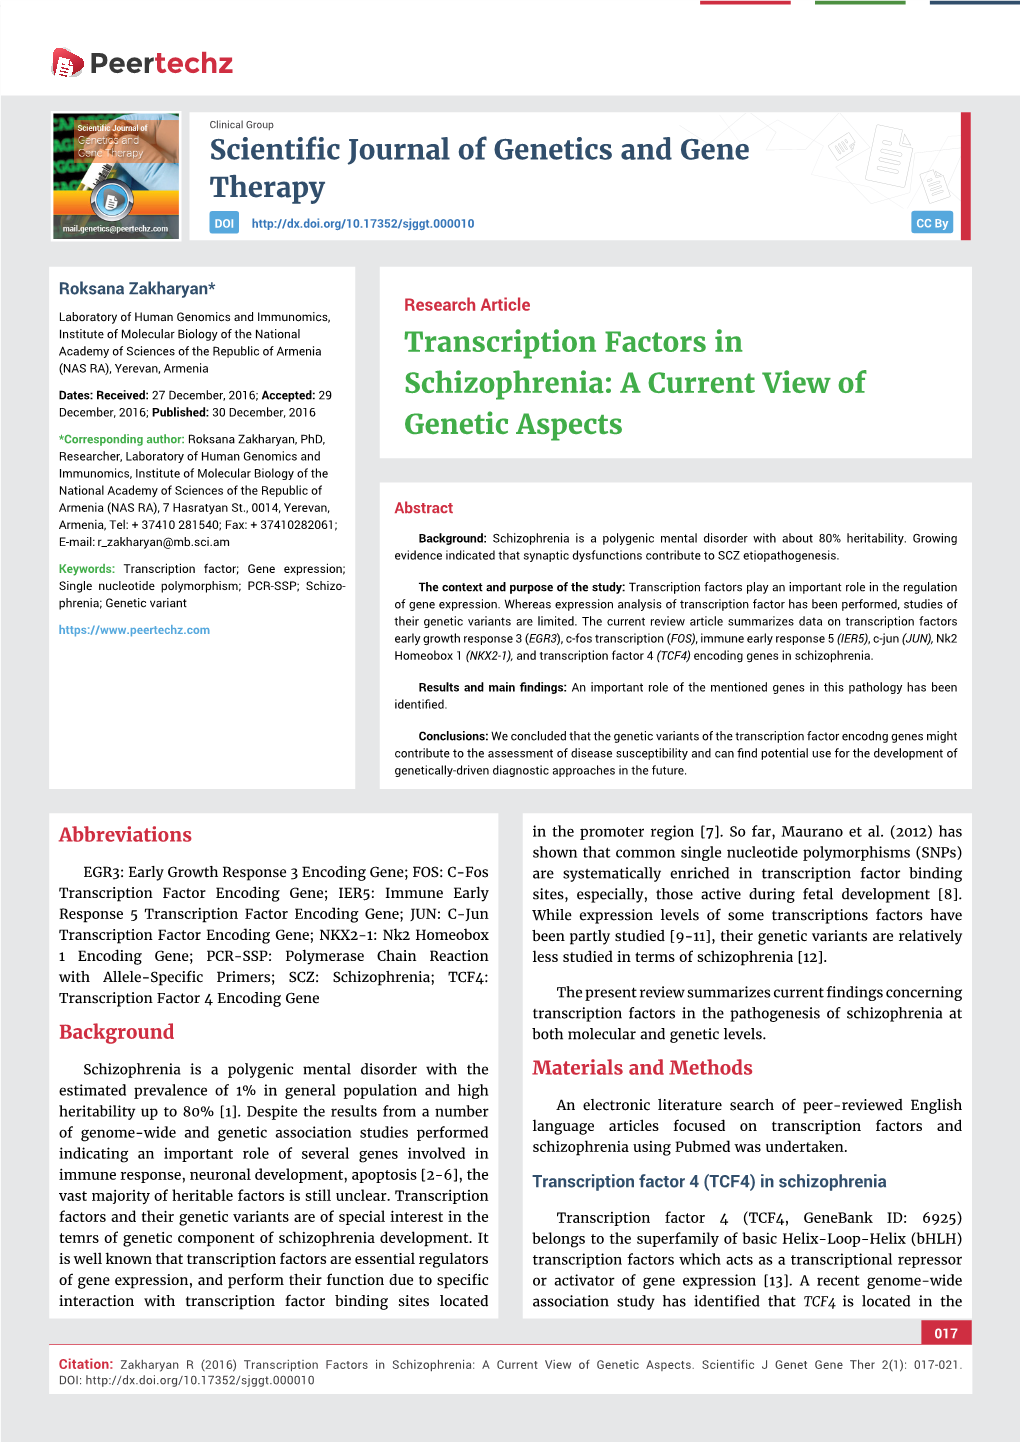 Transcription Factors in Schizophrenia: a Current View of Genetic Aspects